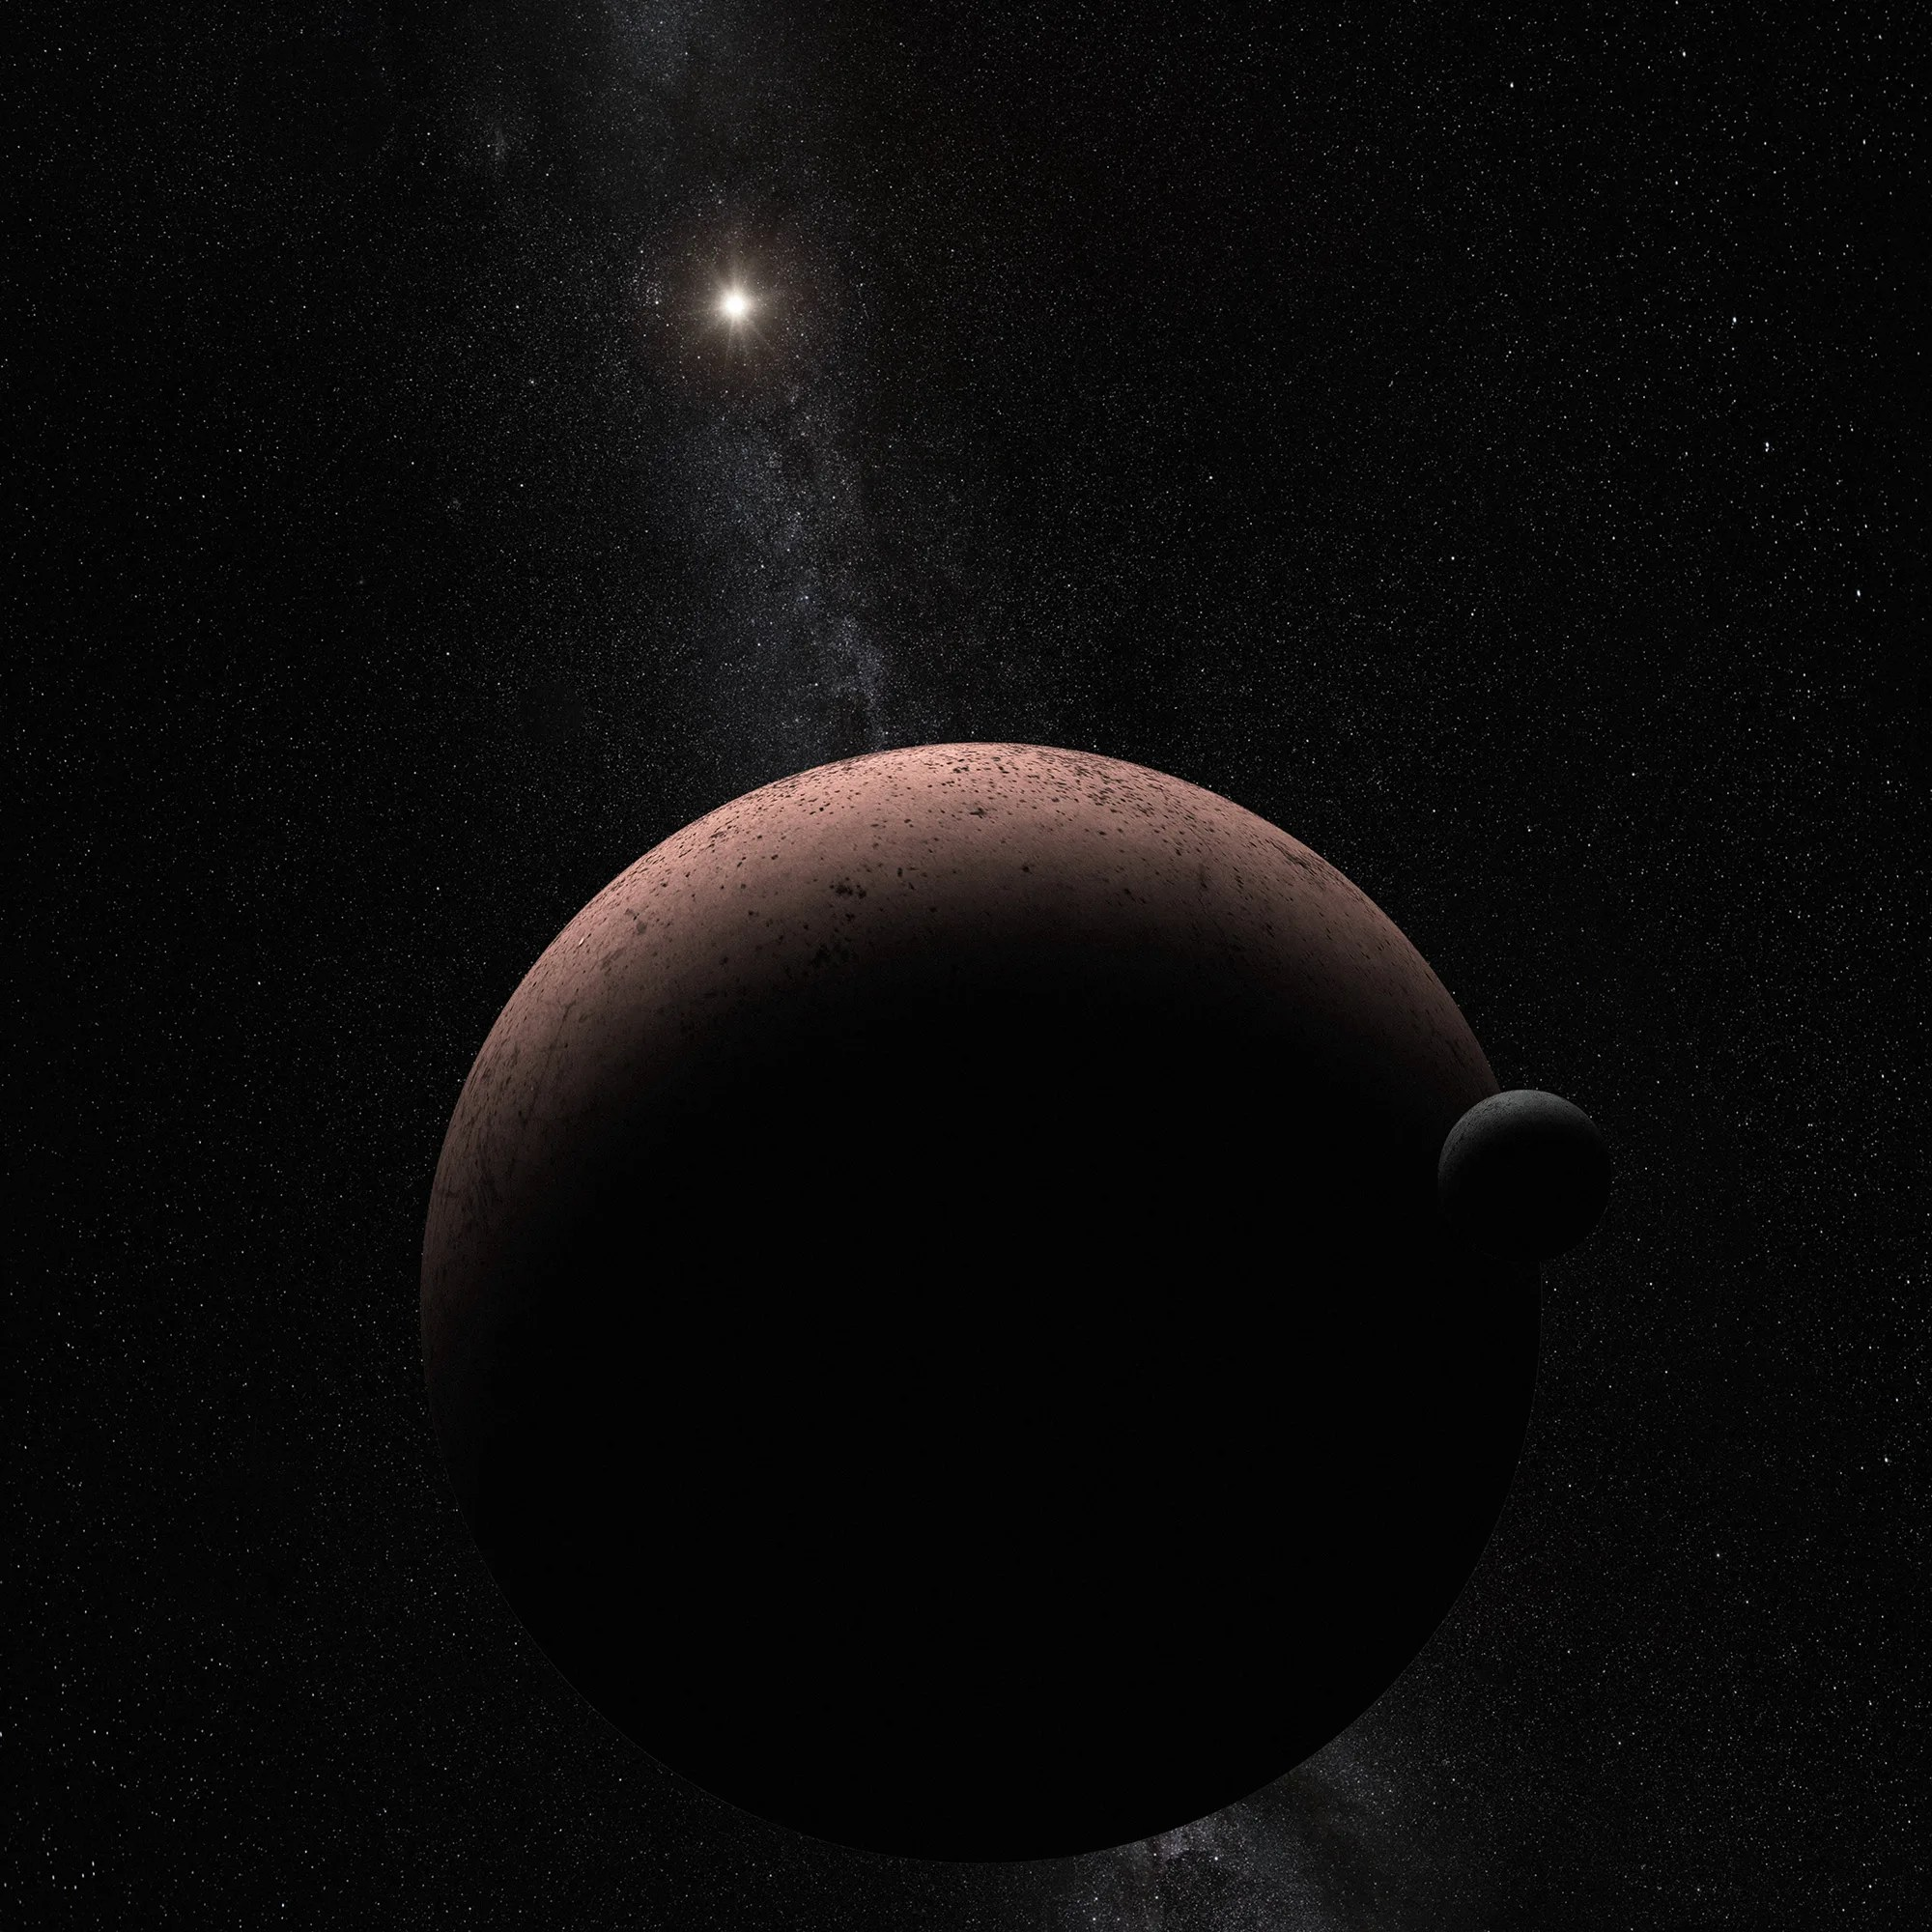 This illustration shows a dim, reddish sphere against black space, with light from a star above it cast across its surface. A smaller sphere, a moon, is visible at the lower right of the bigger sphere.